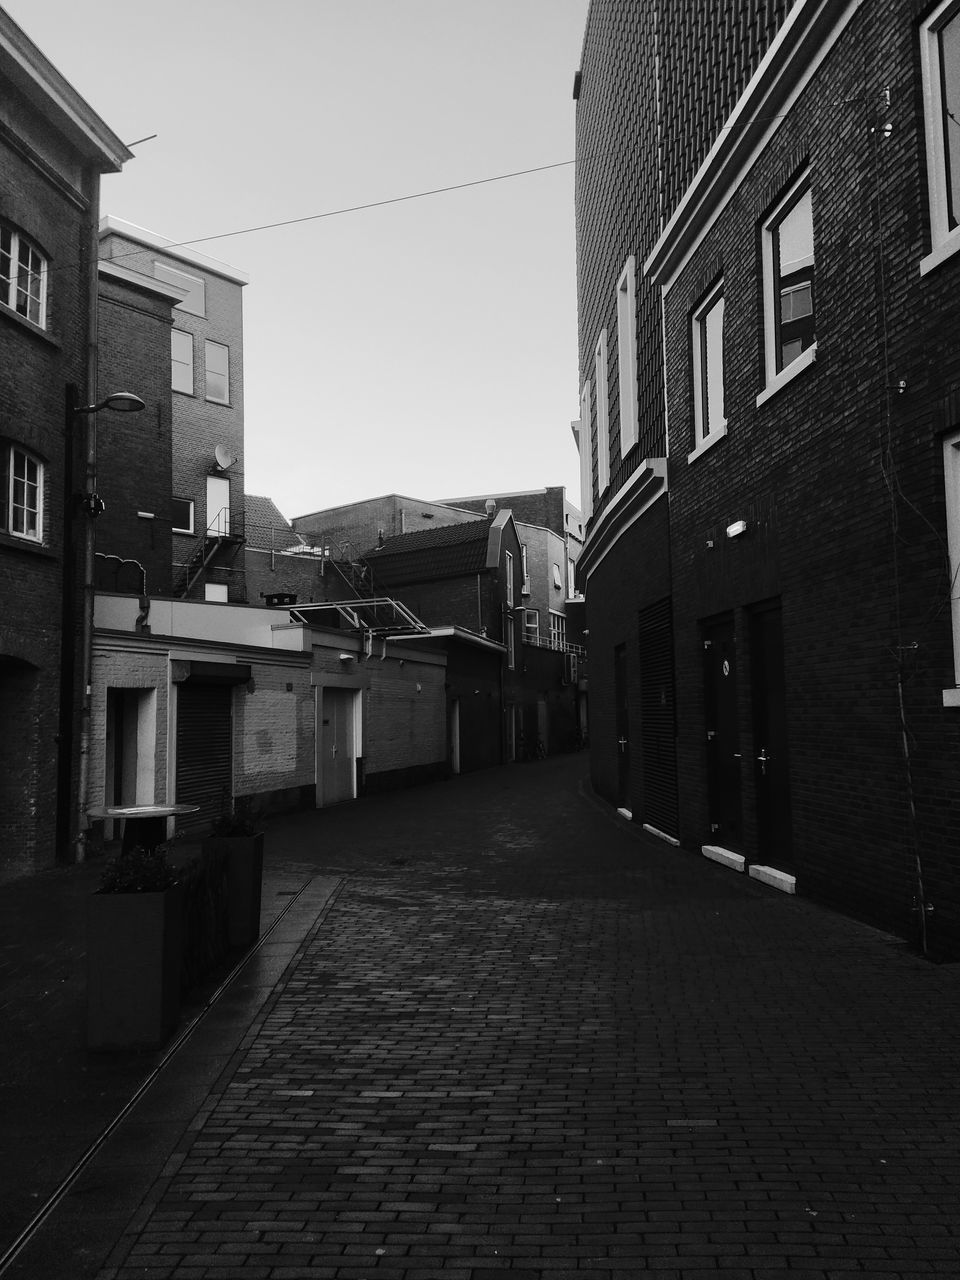 EMPTY ALLEY AMIDST BUILDINGS